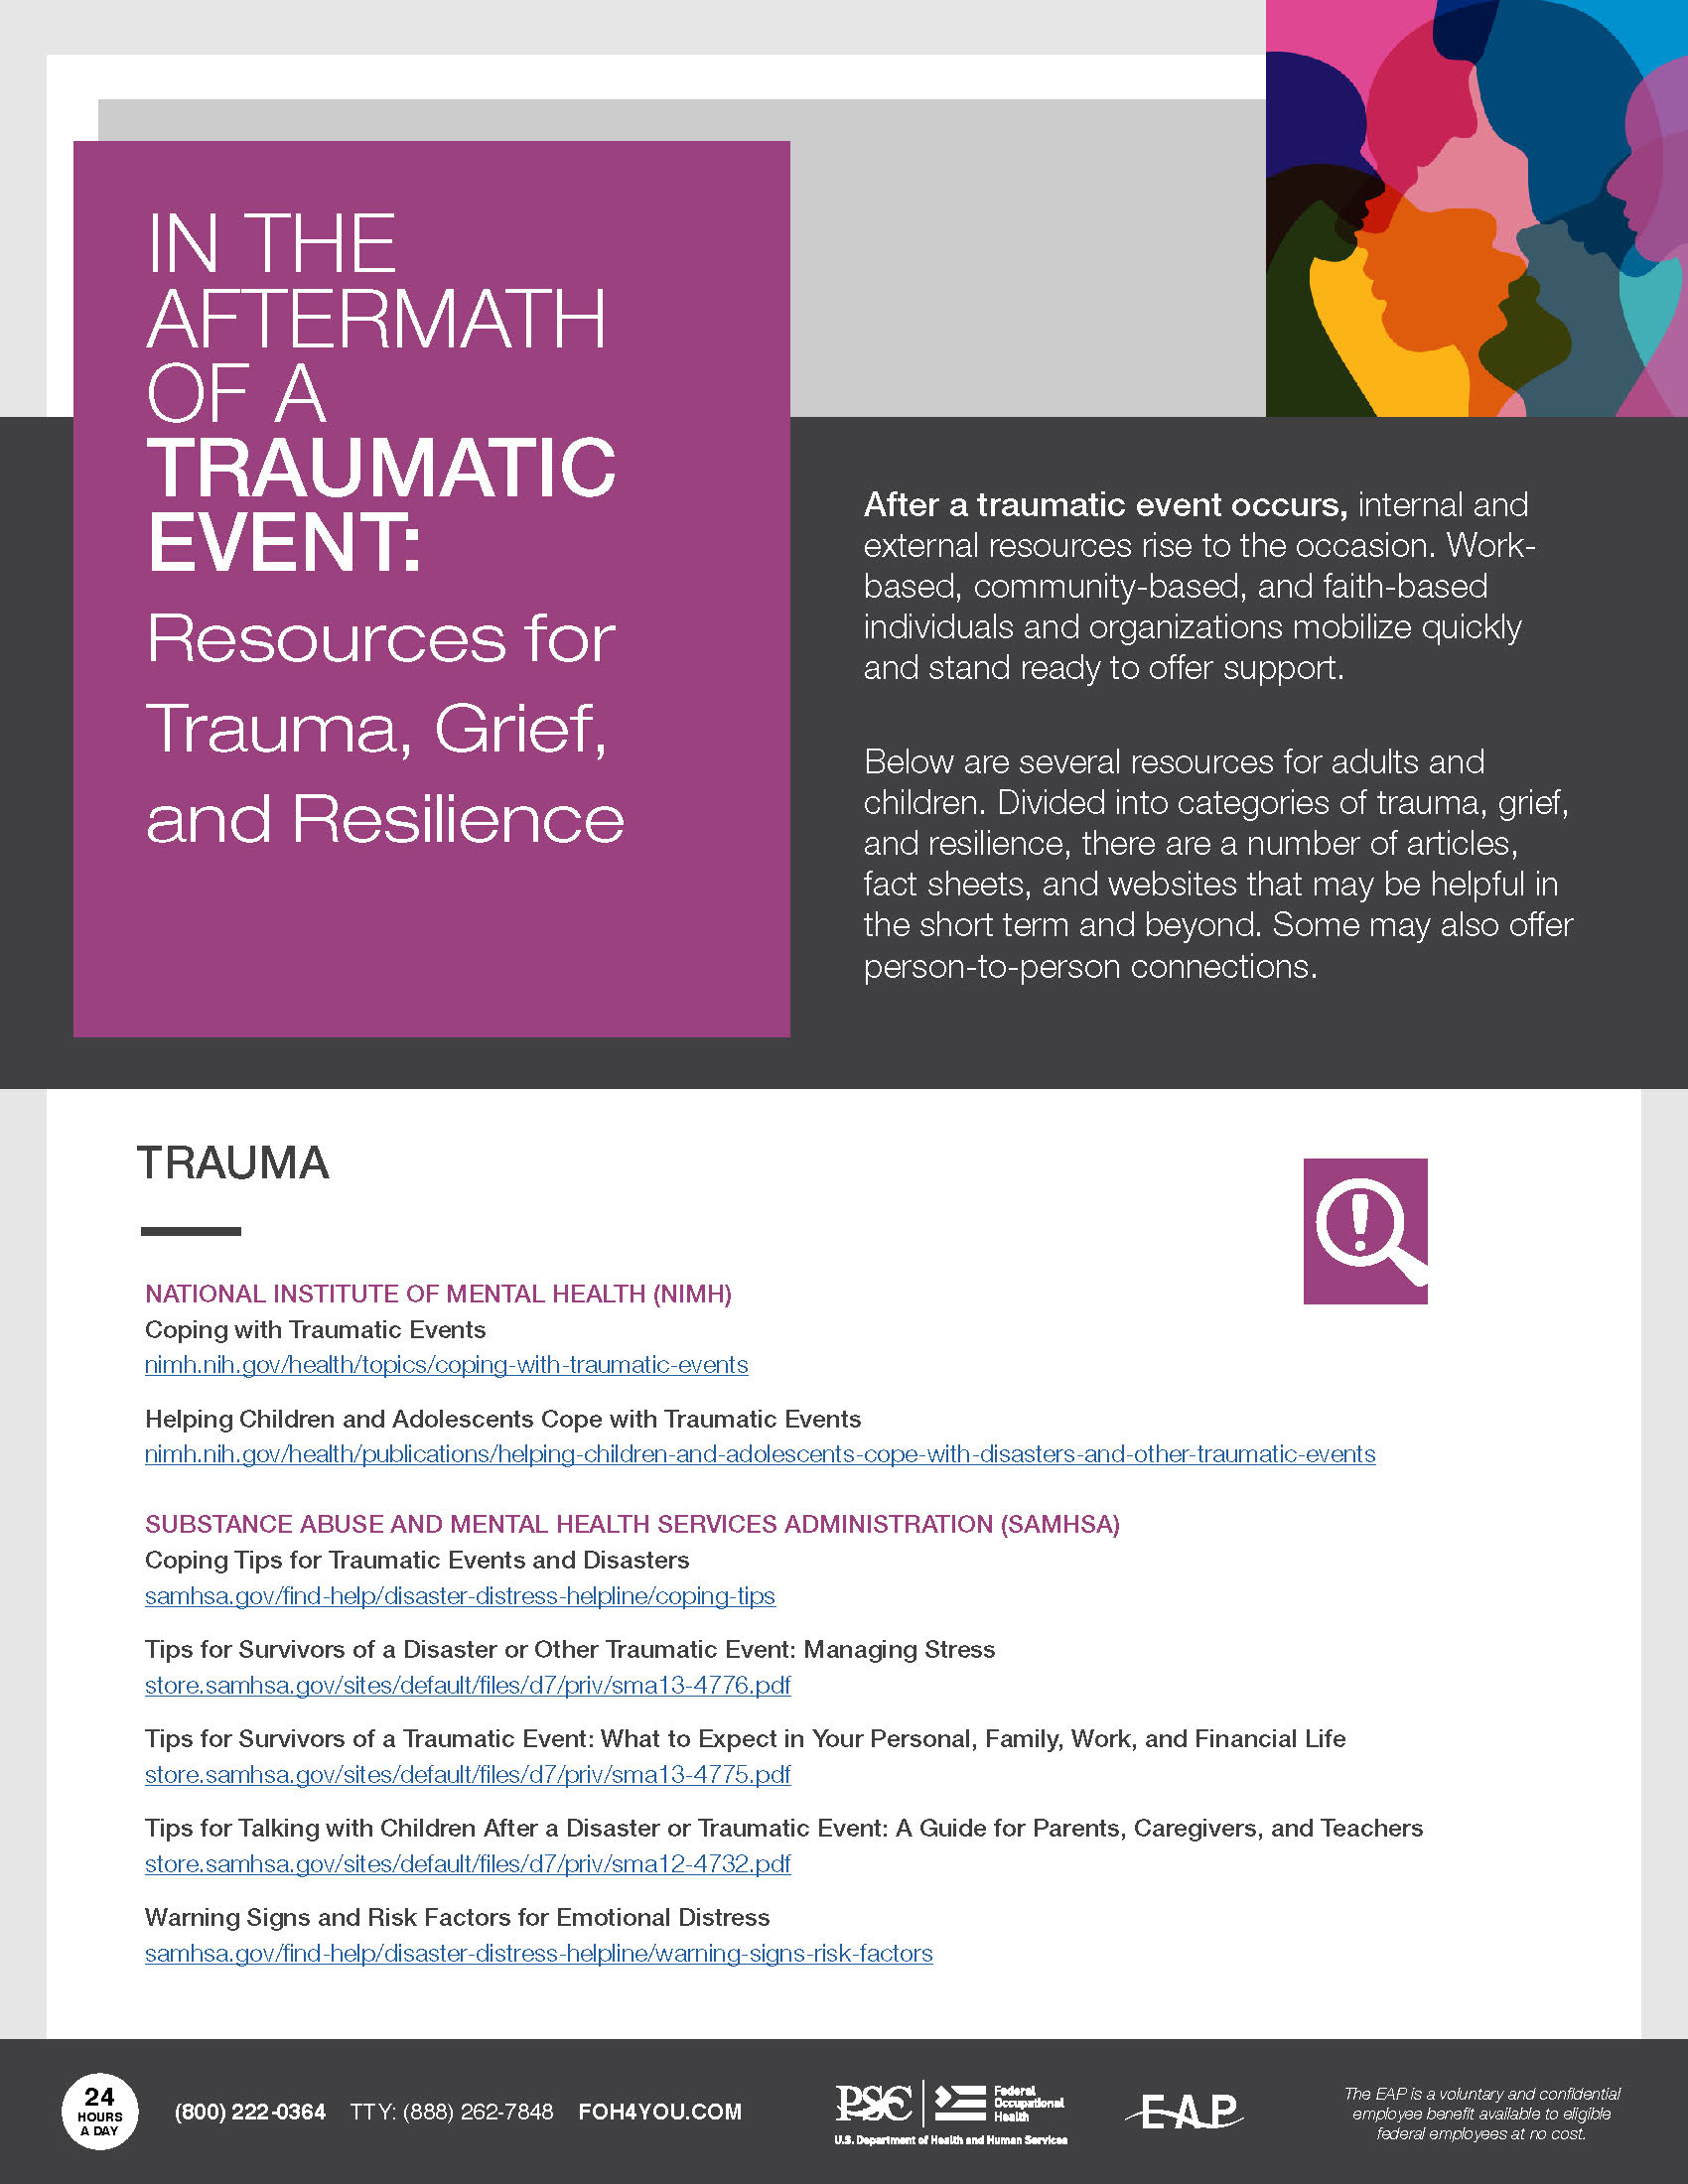 In the Aftermath of a Traumatic Event - Resources